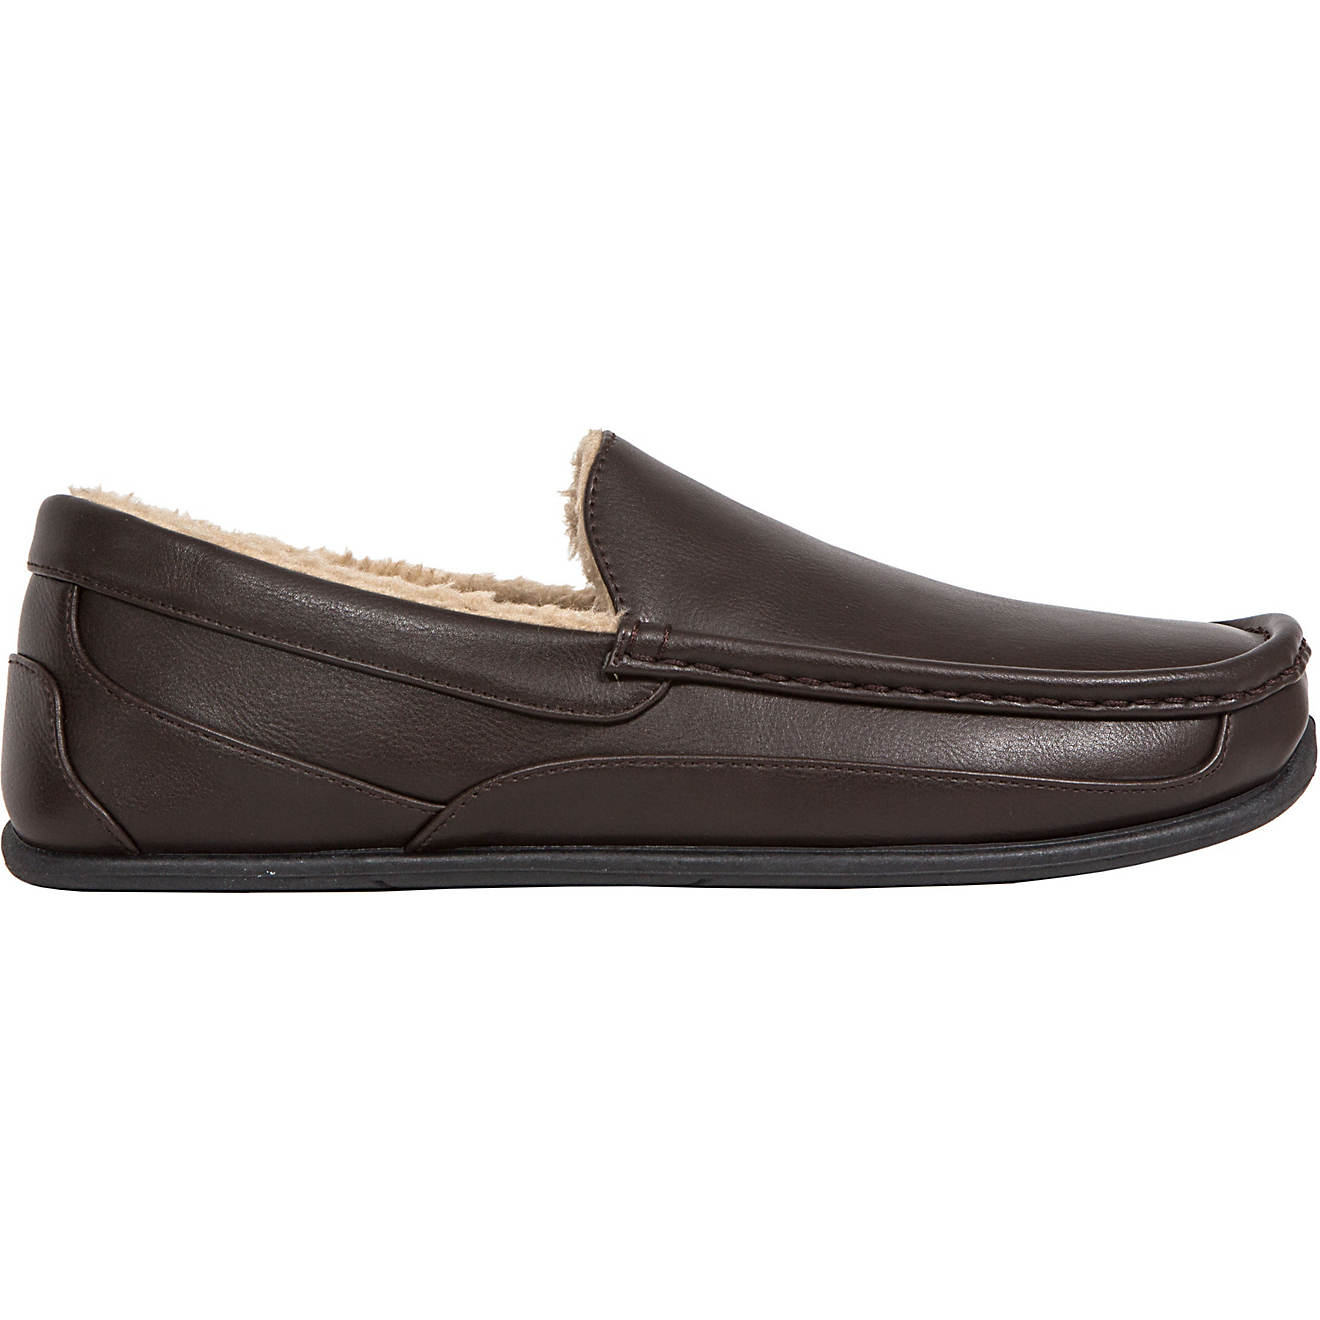 Deer Stags Men’s Slipperooz Moccasin Slippers                                                                                  - view number 1